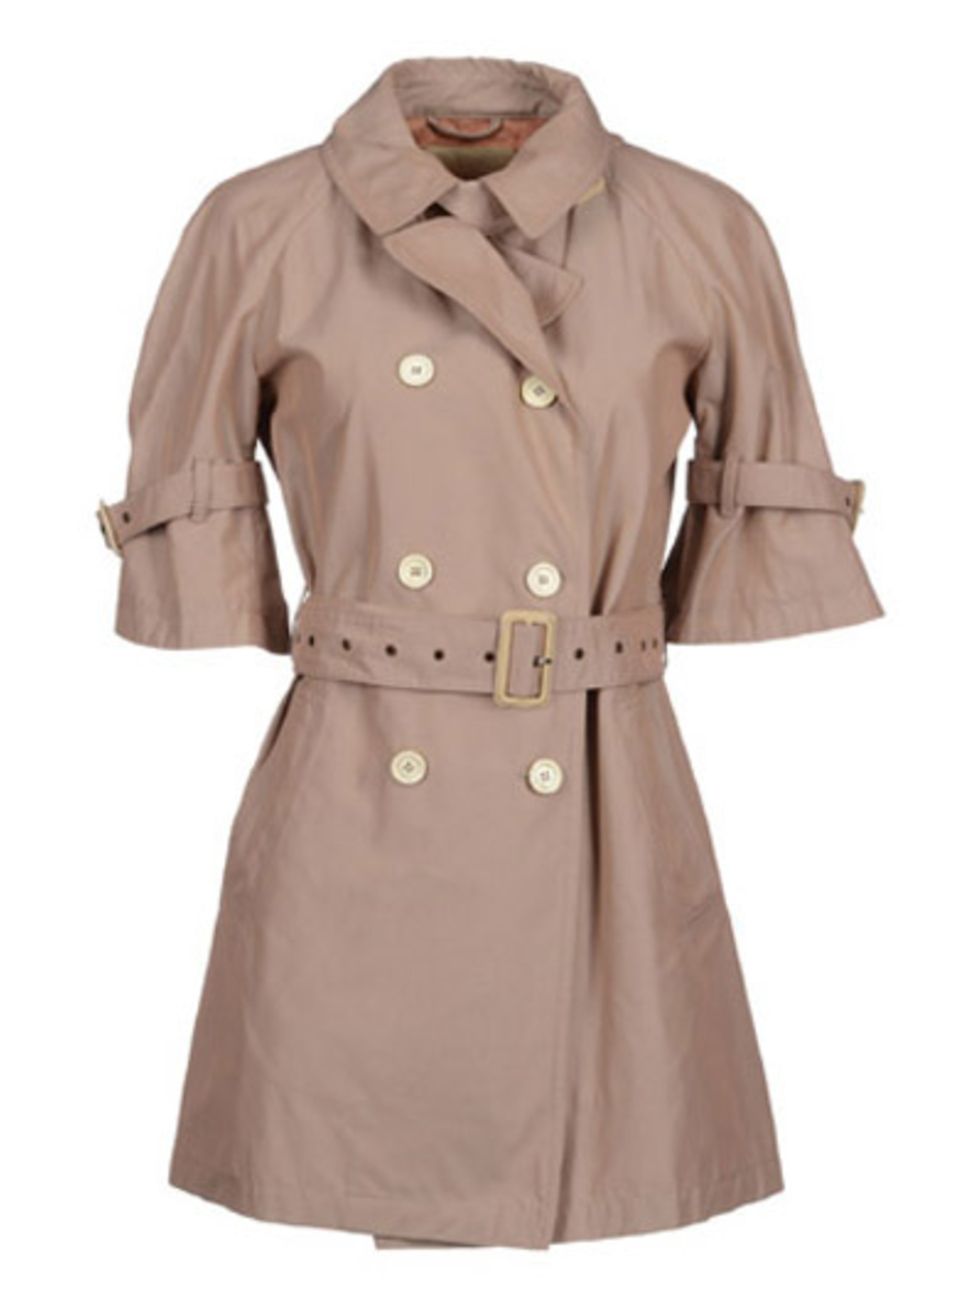 Clothing, Brown, Product, Dress shirt, Collar, Sleeve, Textile, Outerwear, Coat, Uniform, 